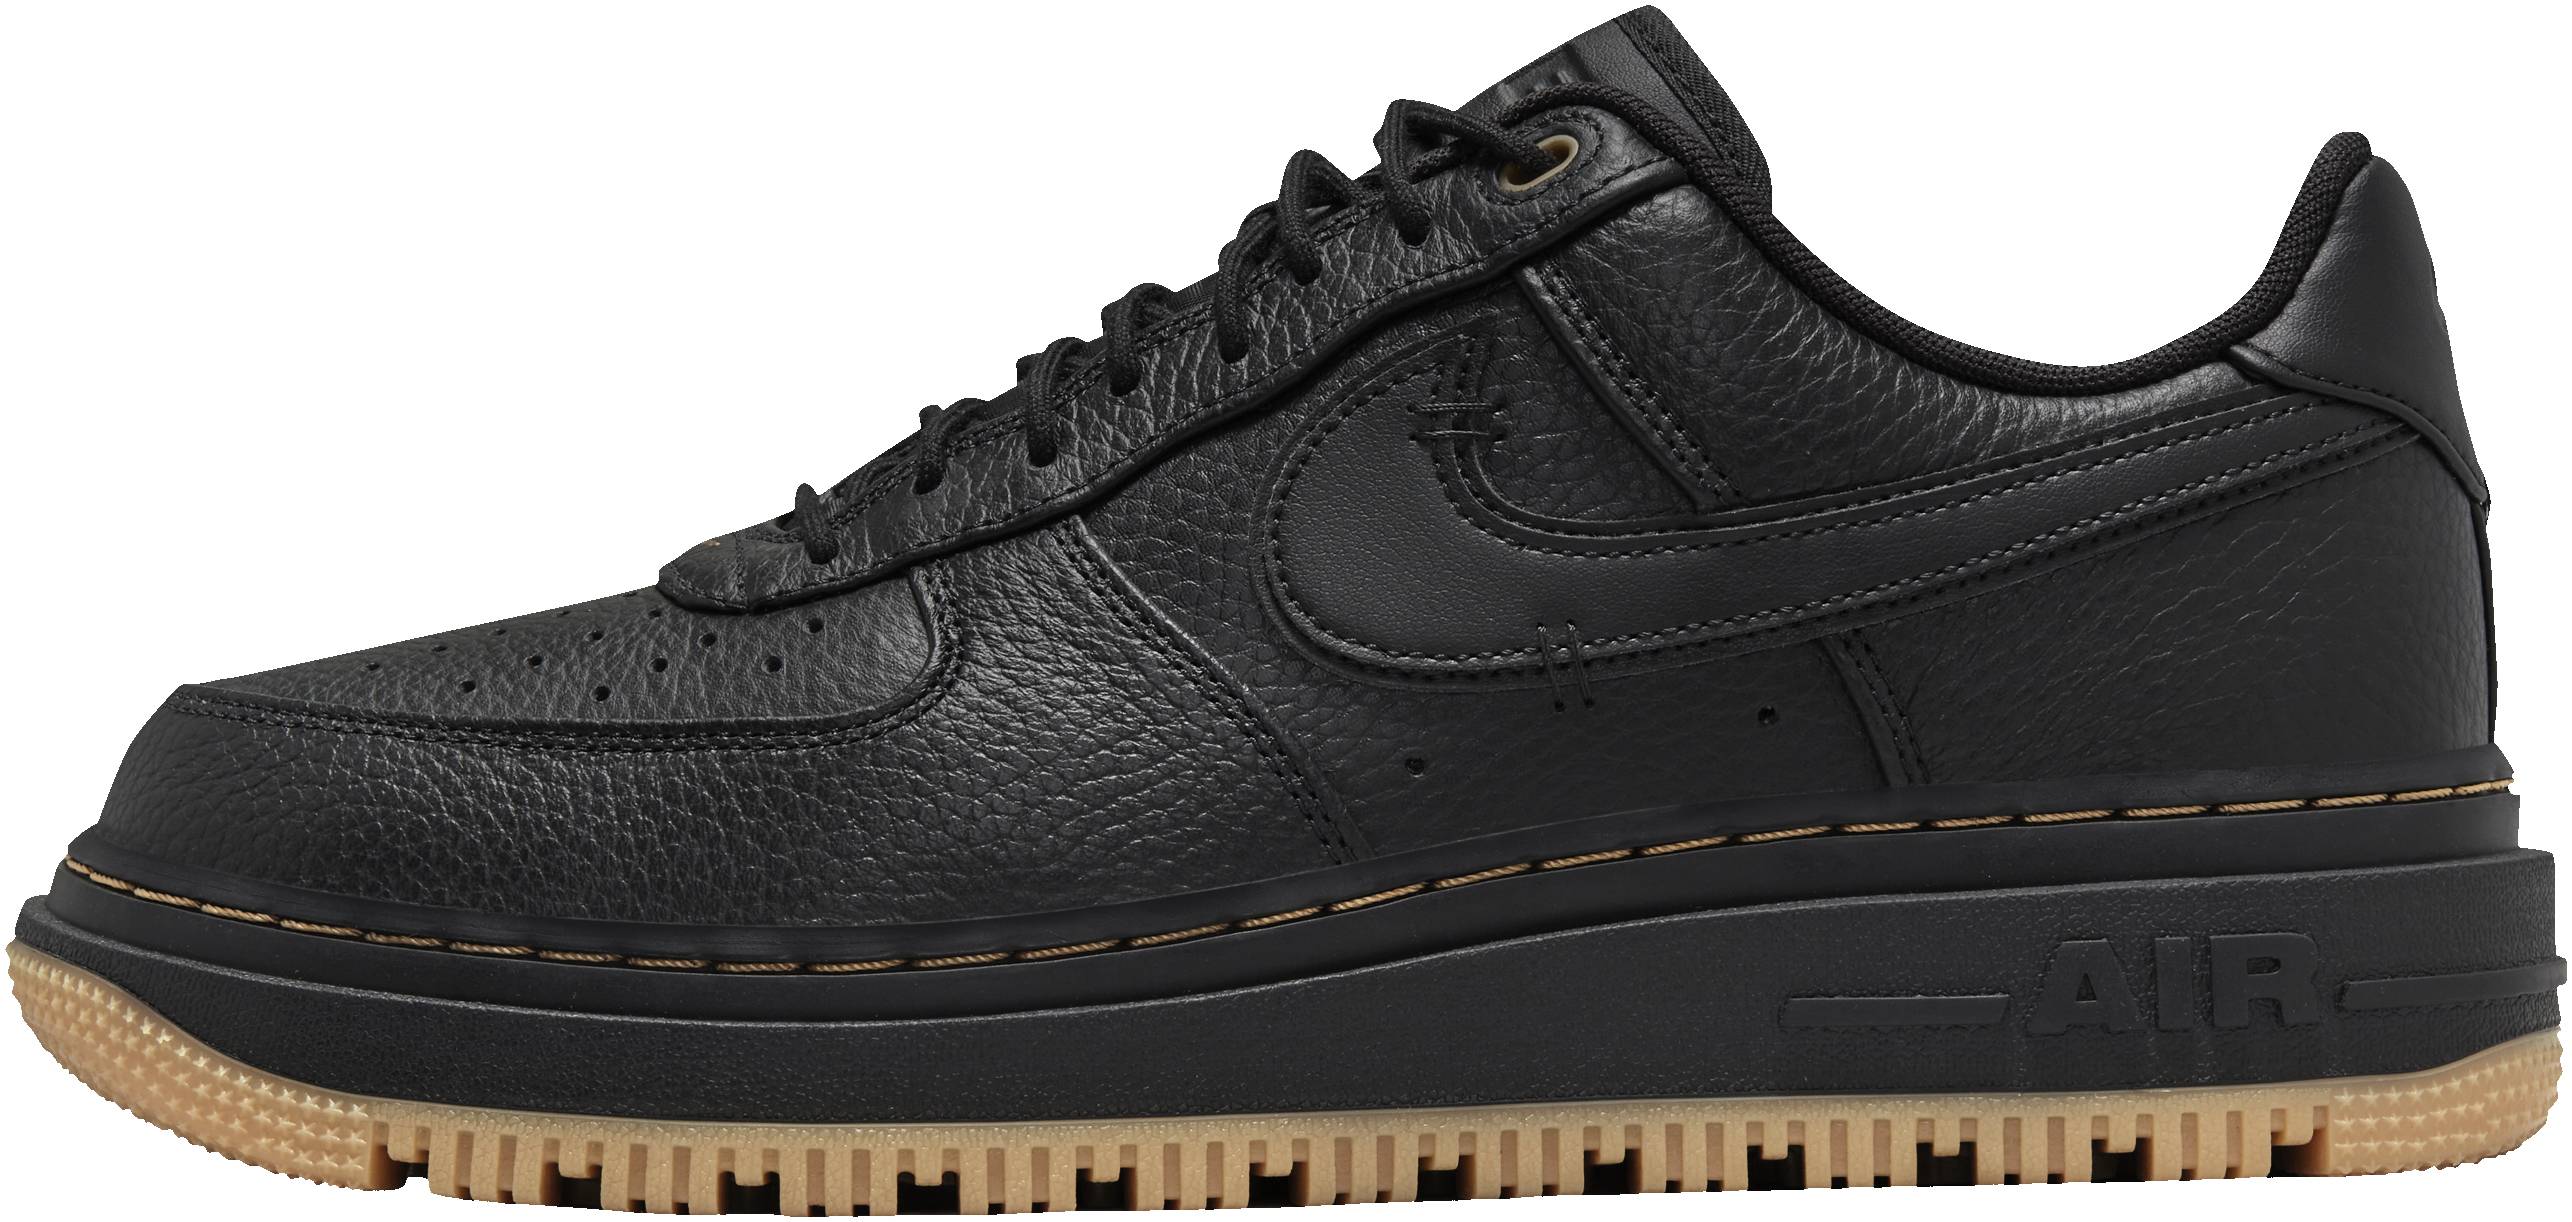 Constricted spirit Year Nike Air Force 1 Luxe sneakers in black + white | RunRepeat